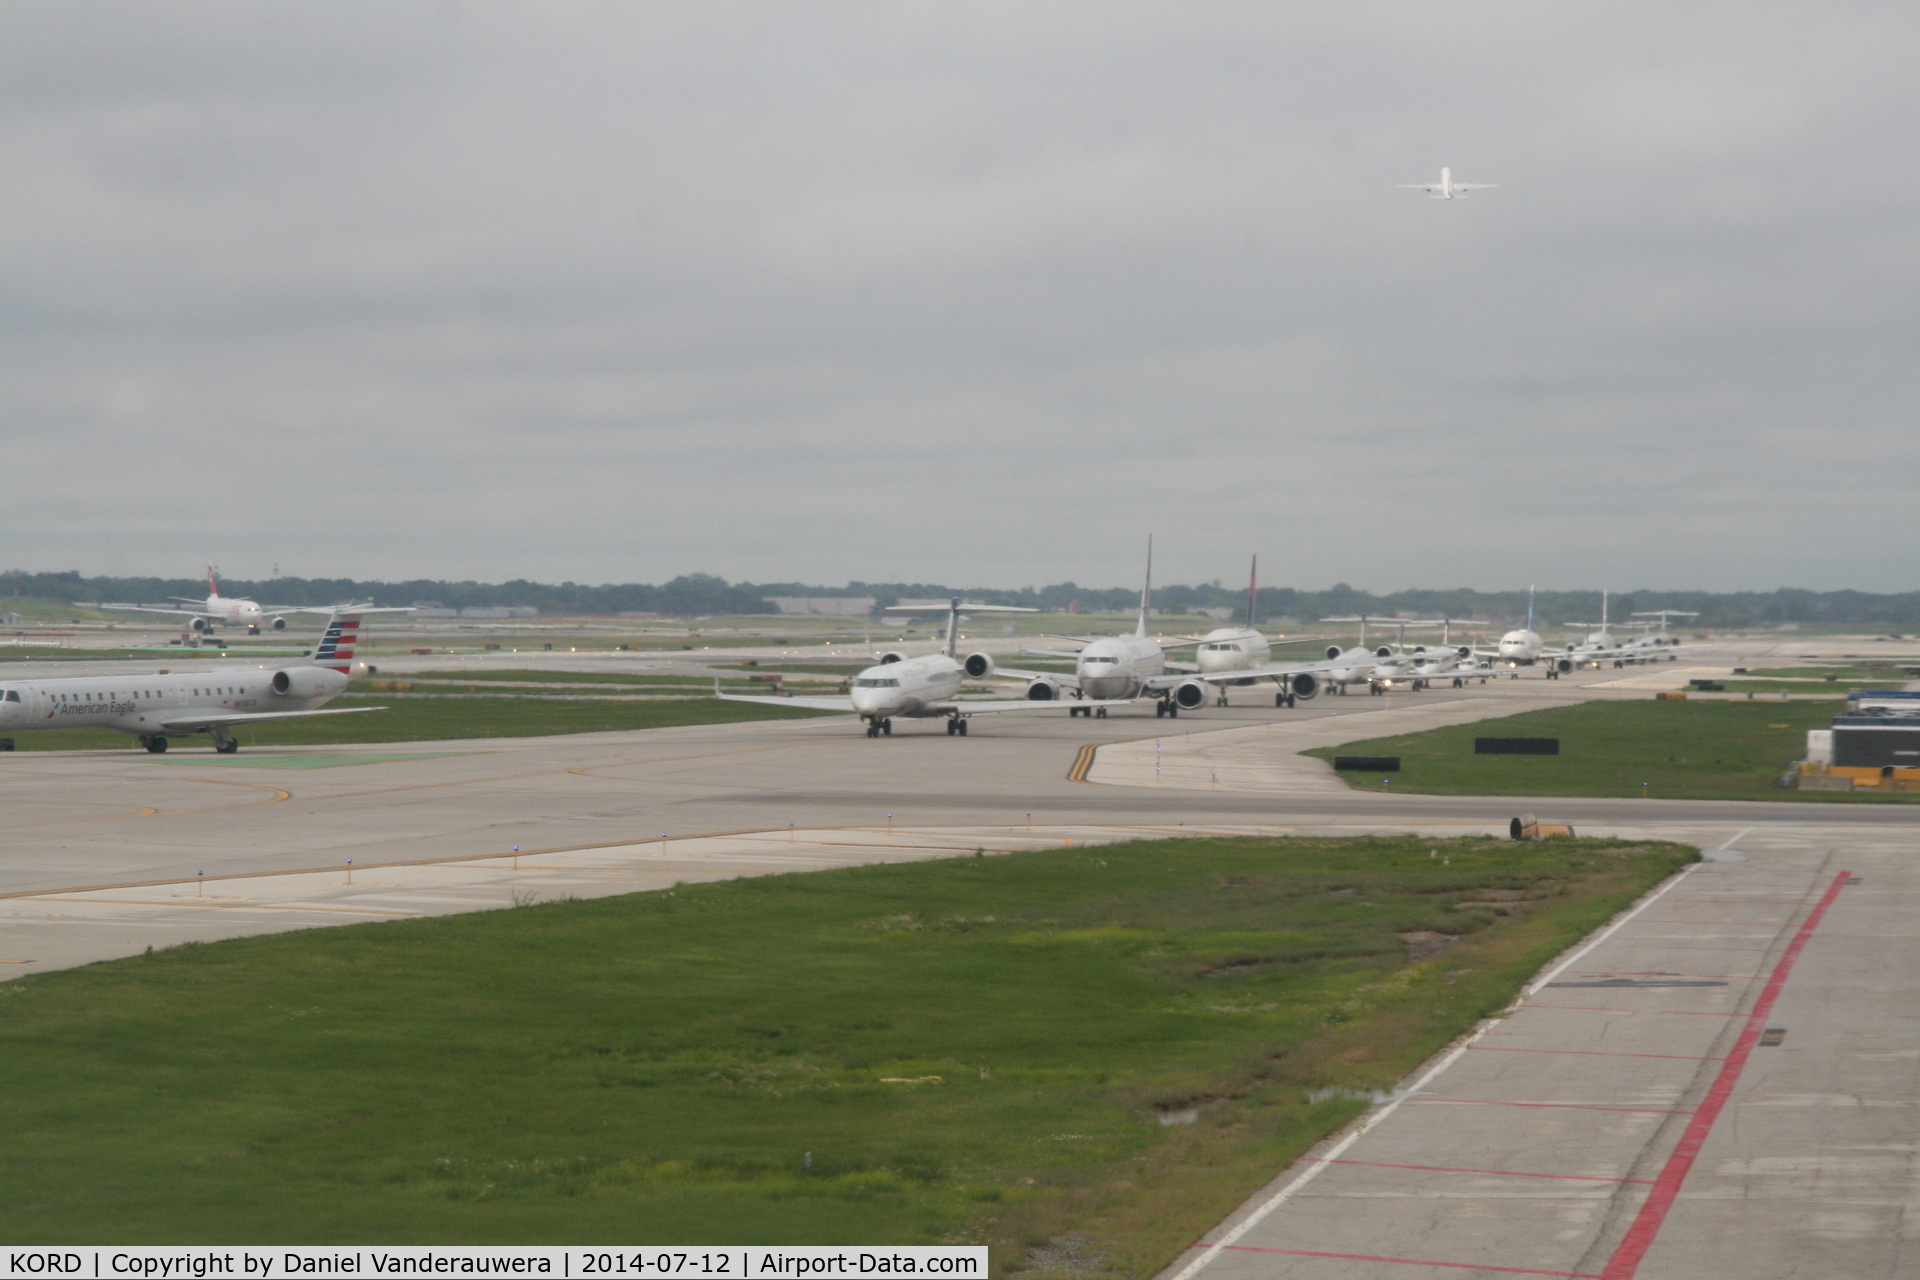 Chicago O'hare International Airport (ORD) - Queuing on the taxiway to take off